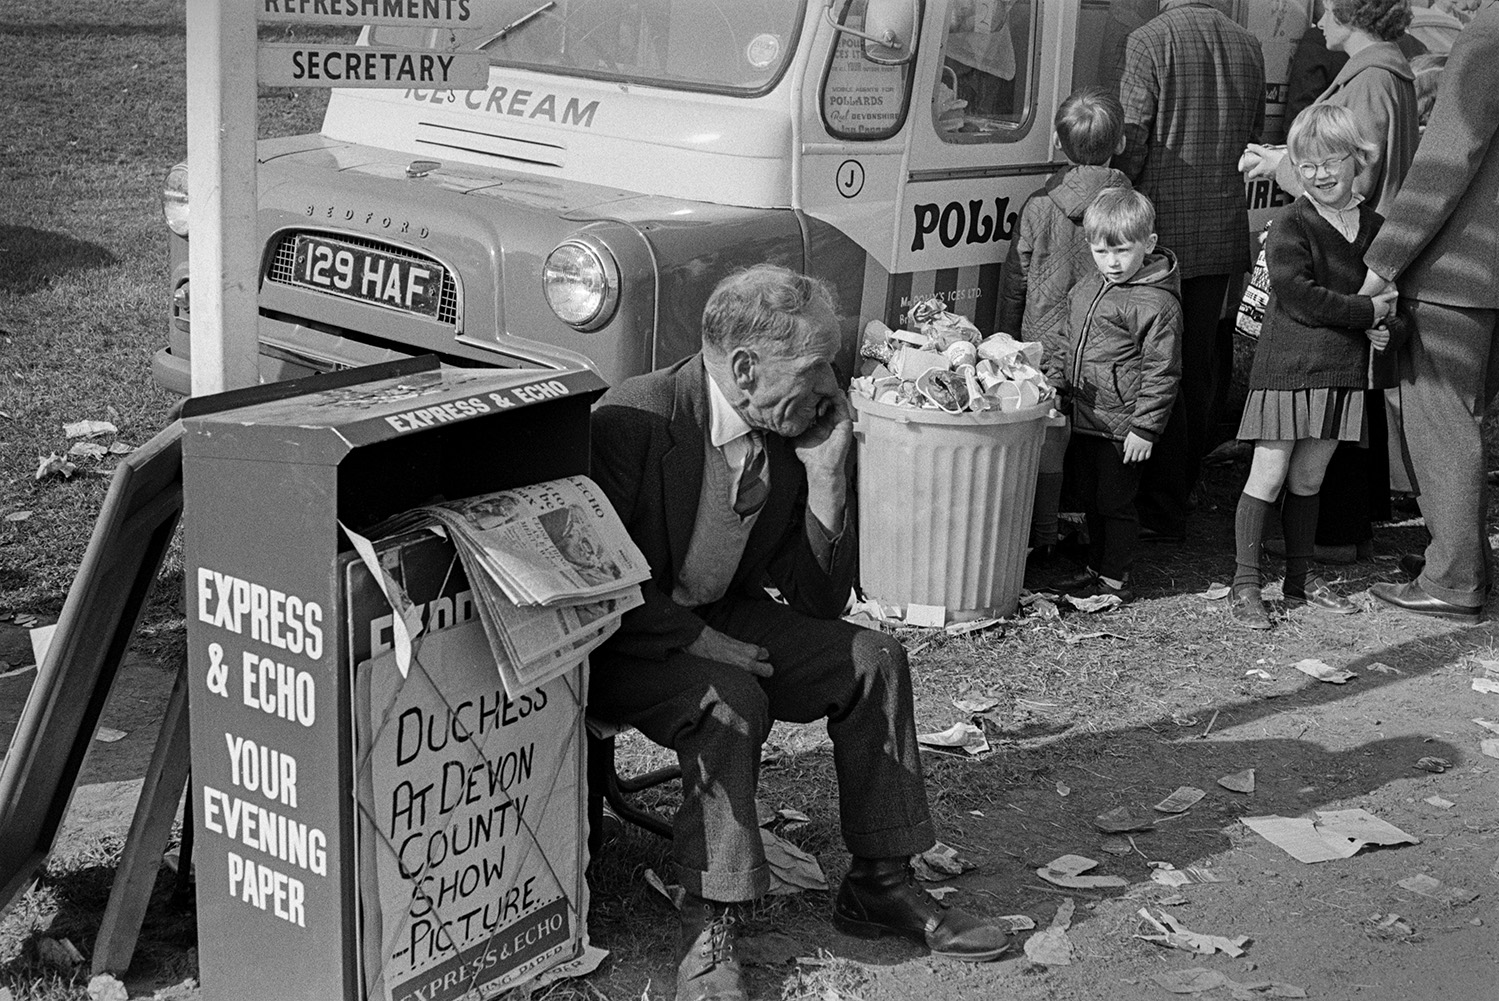 A newspaper vendor selling the Express and Echo newspaper at the Devon County Show in Whipton, Exeter. Men, women and children are queuing at a ice cream van, and rubbish is strewn on the ground from a overflowing bin, in the background.